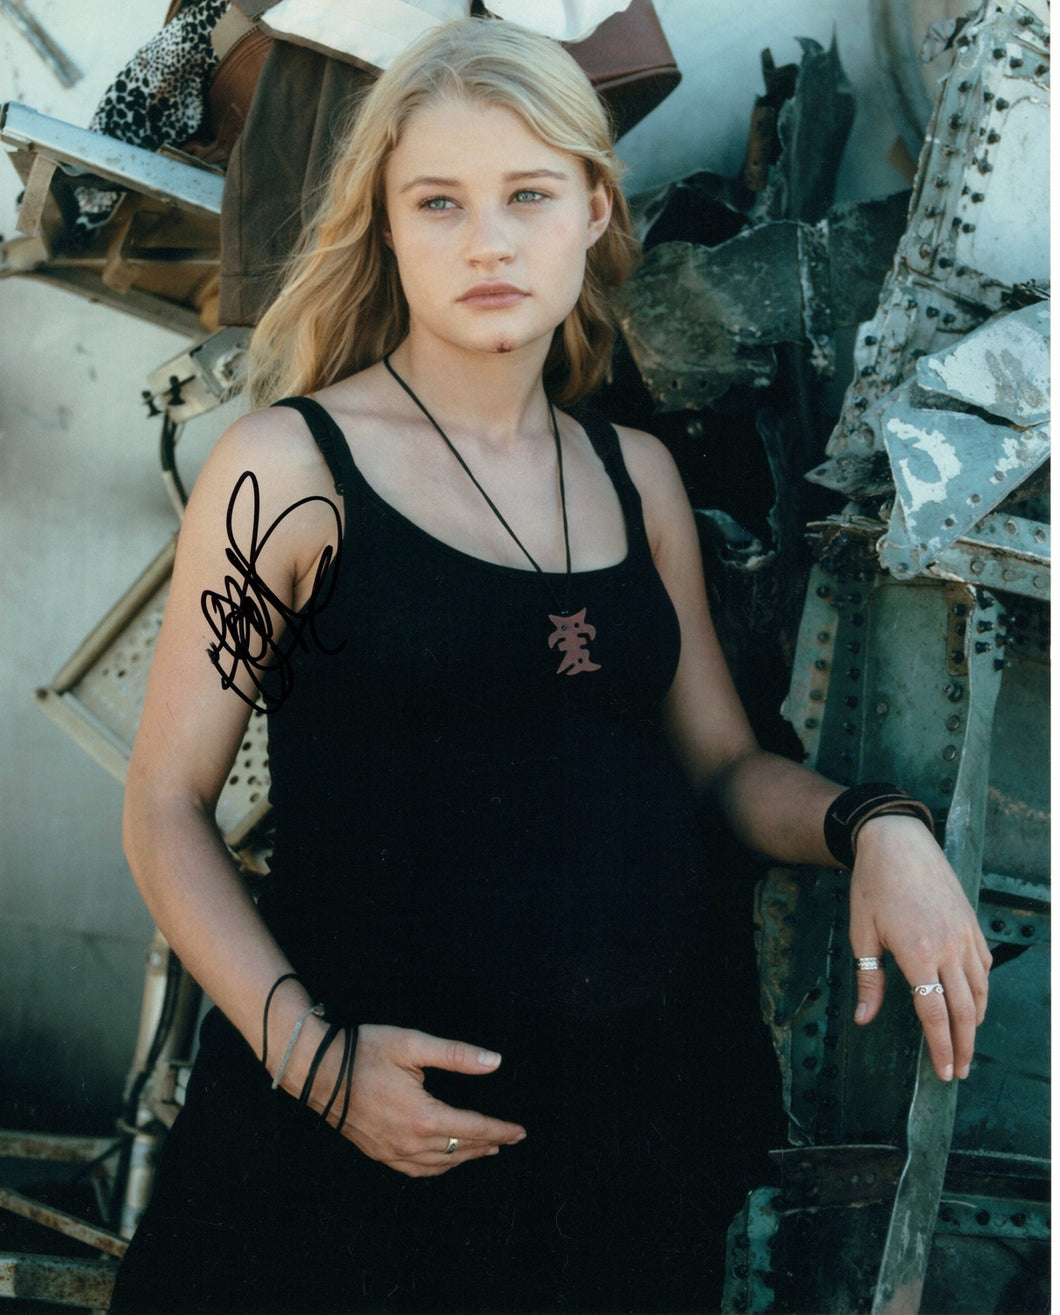 Emily Deravin Autographed Signed 8x10 Photo